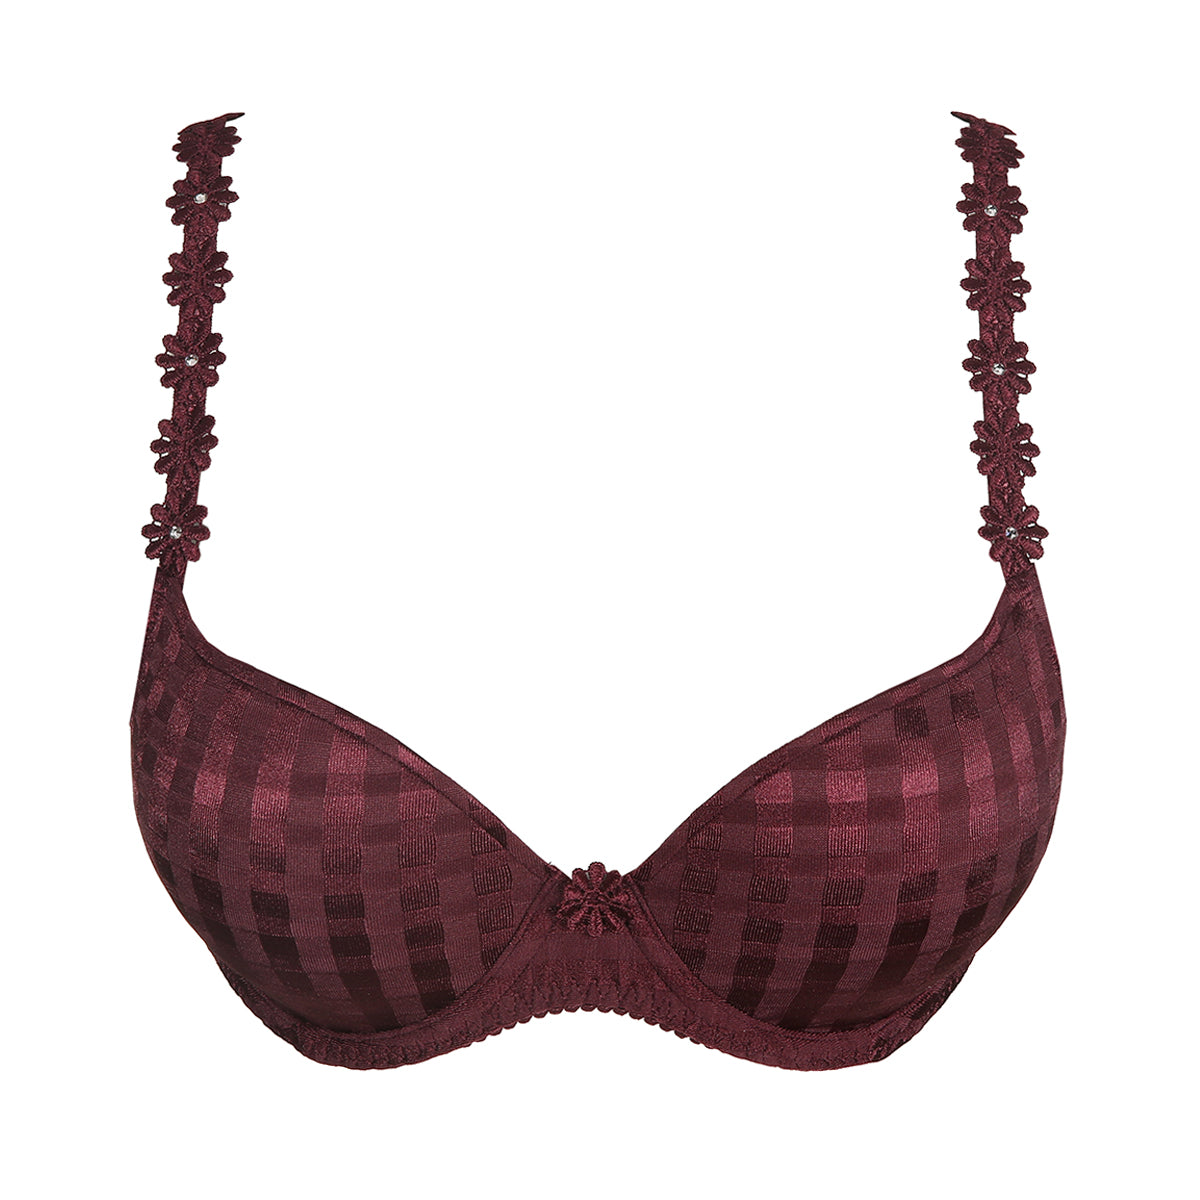 Buy ANGELIQUE DREAM PUSH UP BRA online at Intimo